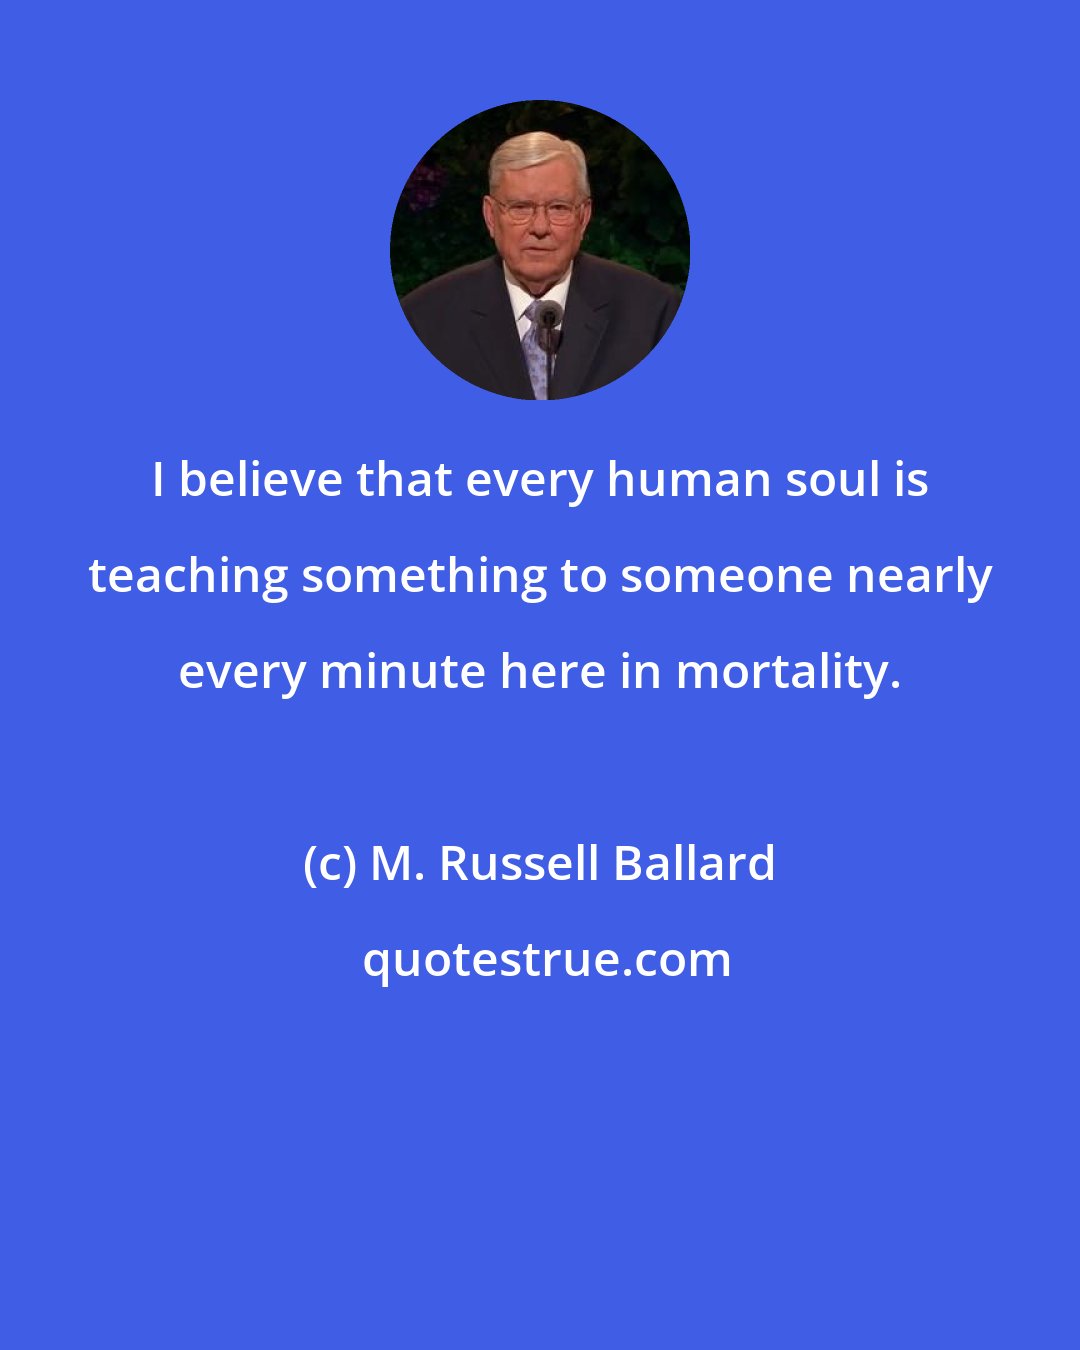 M. Russell Ballard: I believe that every human soul is teaching something to someone nearly every minute here in mortality.